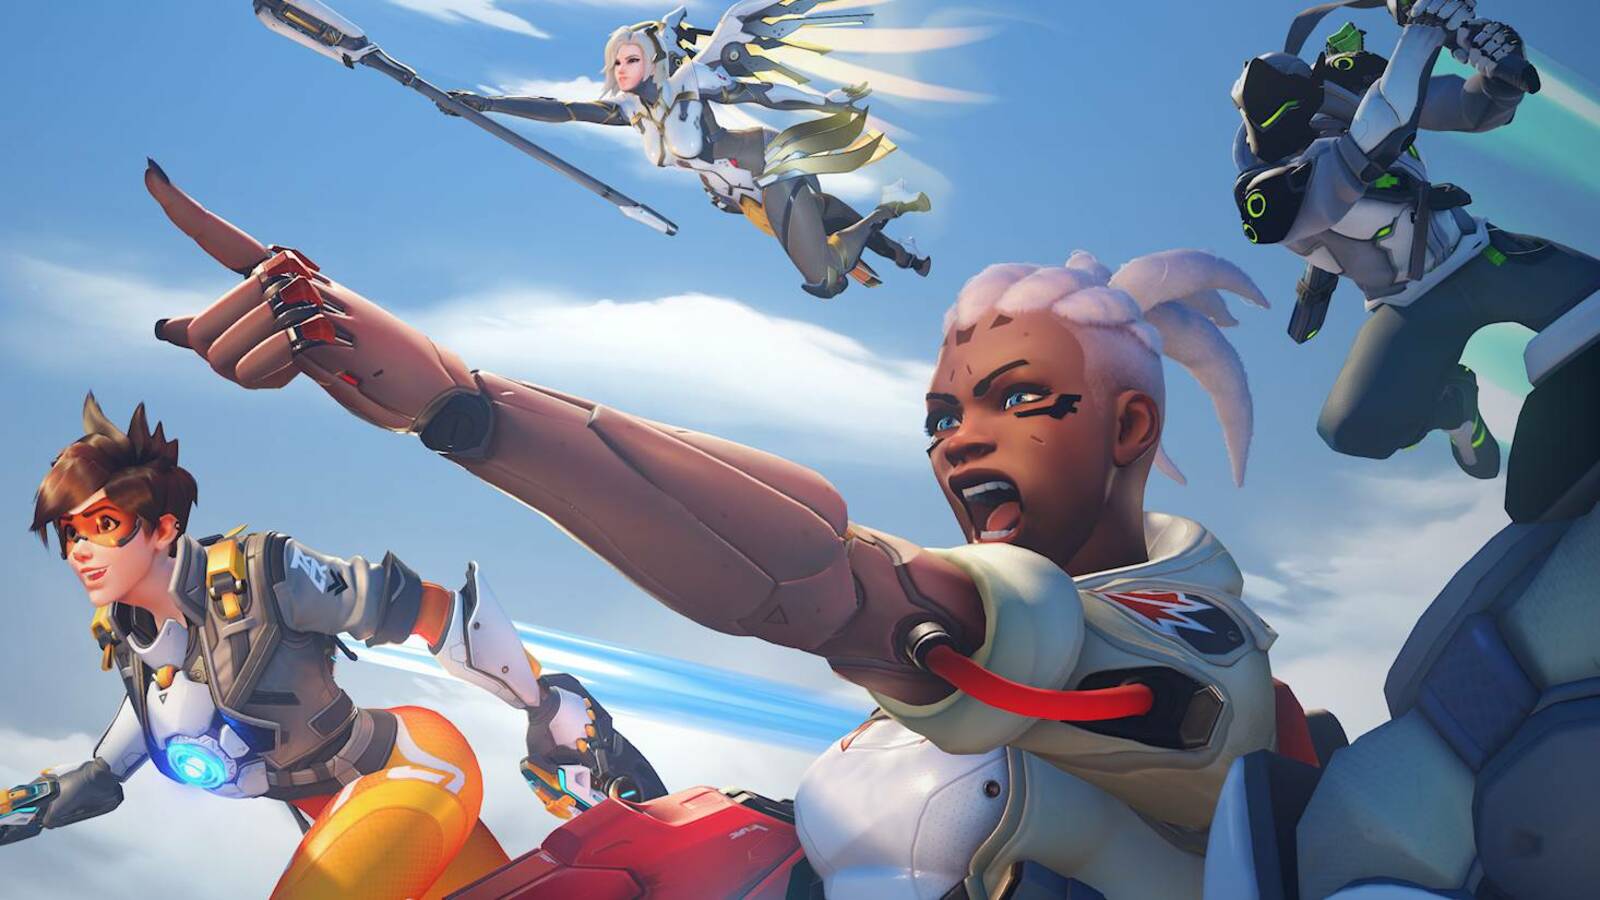 Overwatch 2 review - a brilliant teamplay experience in the grip of an existential crisis